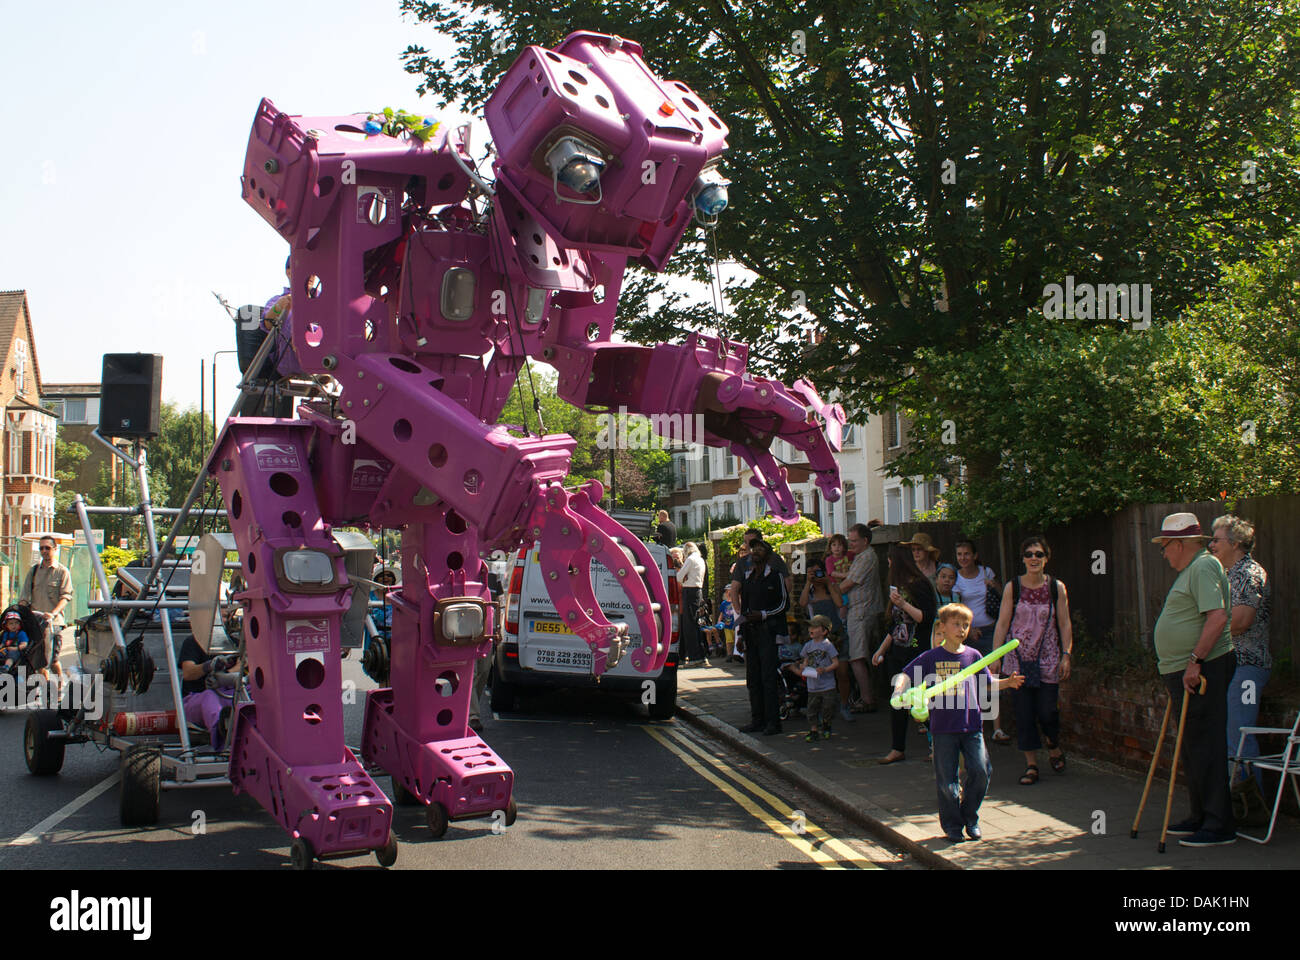 Wheelie Bin Robot High Resolution Stock Photography and Images - Alamy